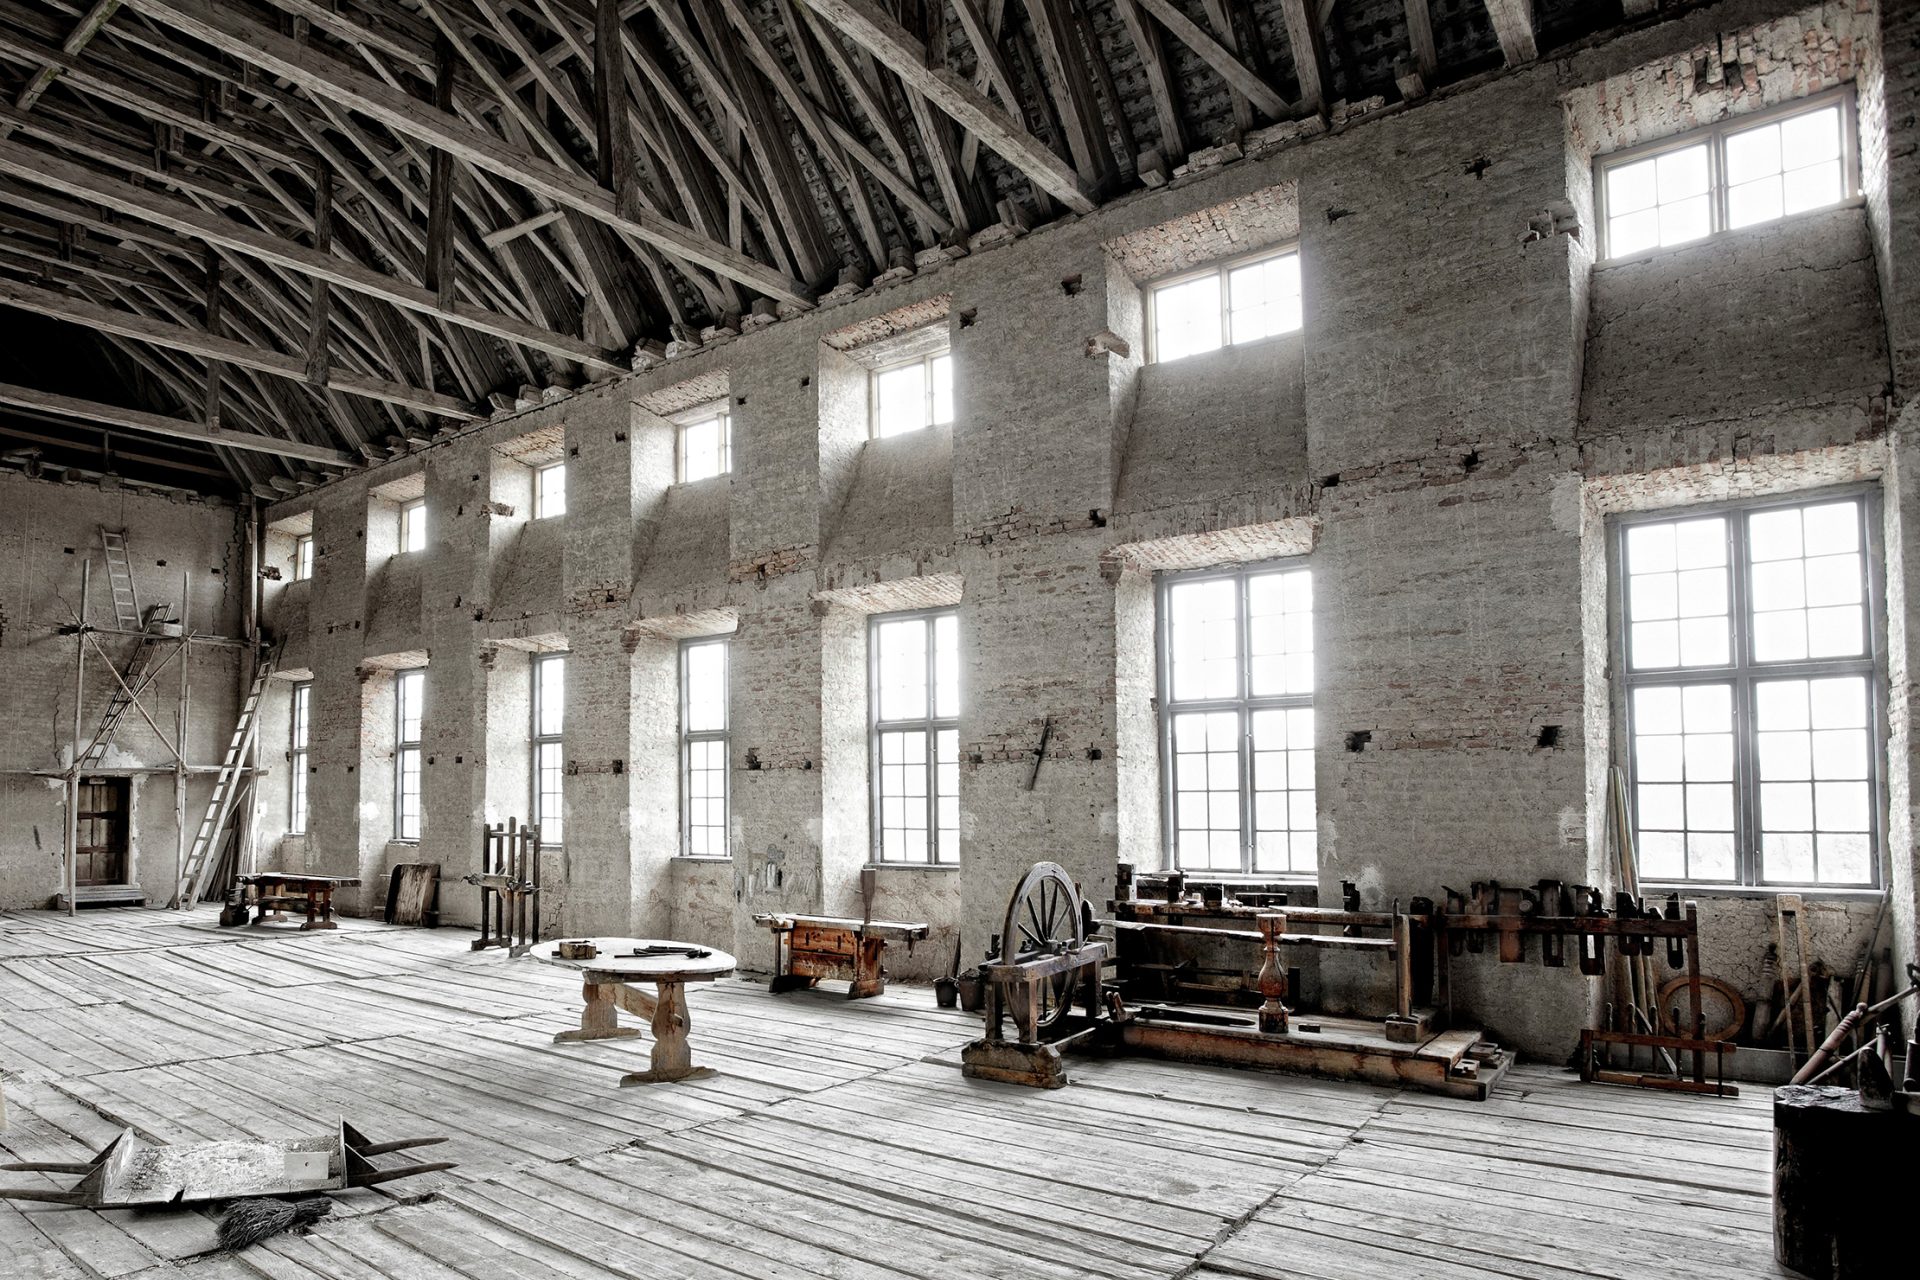 The Unfinished Hall with its bare walls and wooden floor.